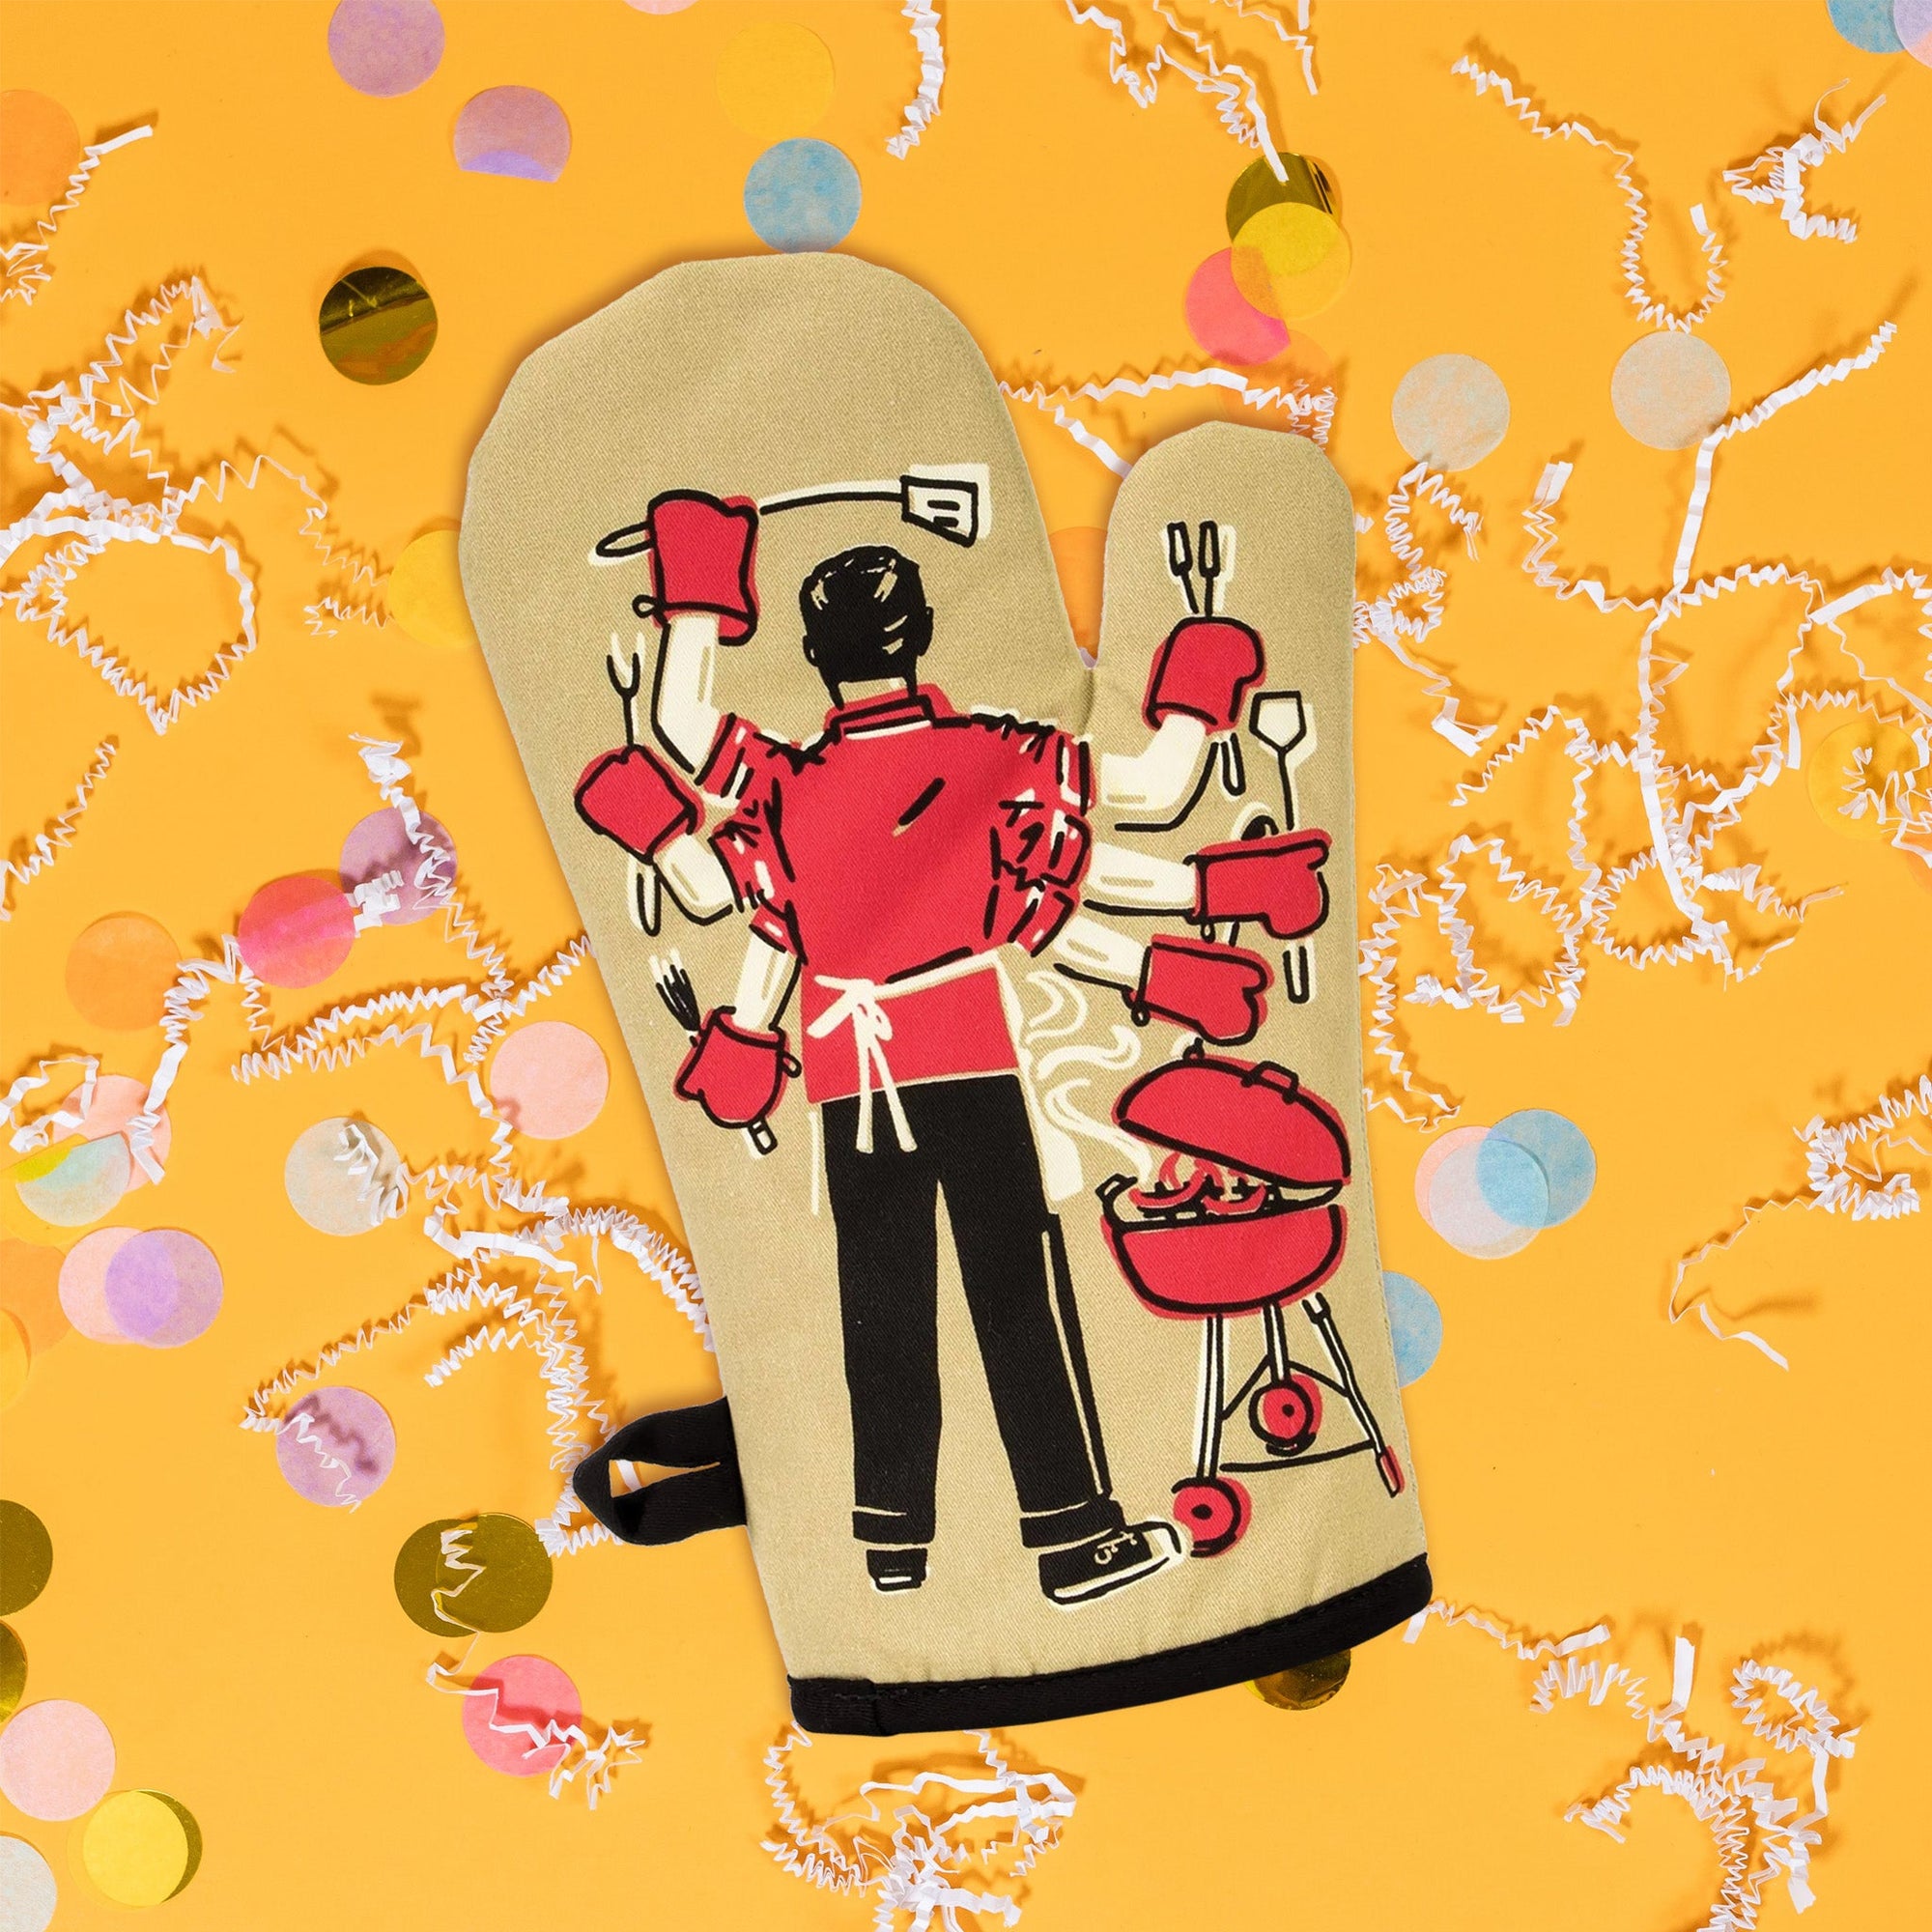 On sunny mustard background sits an oven mitt with white crinkle and big, colorful confetti scattered around. The back of this khaki oven mitt has a vintage illustration of the back of a man barbequing with six arms and hands. In each hand are bbq utensils. The colors are khaki, red, black, and white.